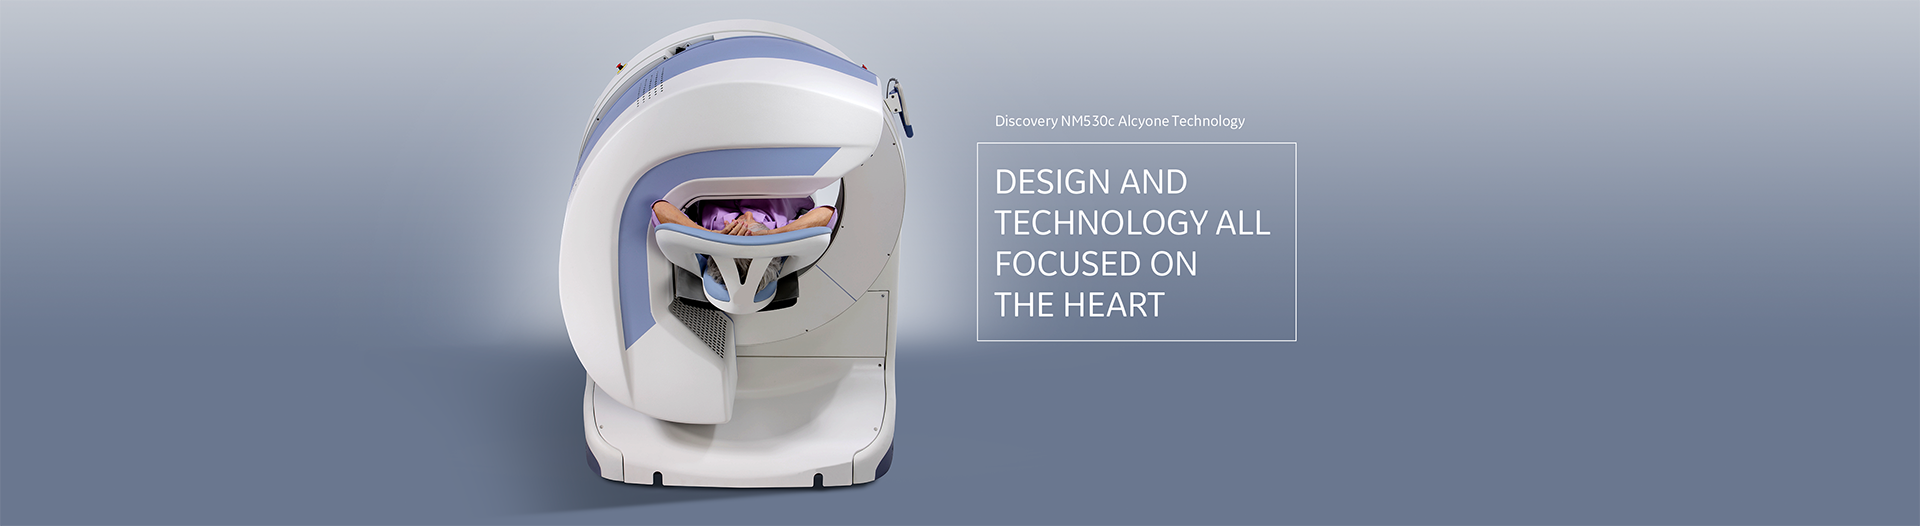 Discovery-NM530c-Alcyone-Technology